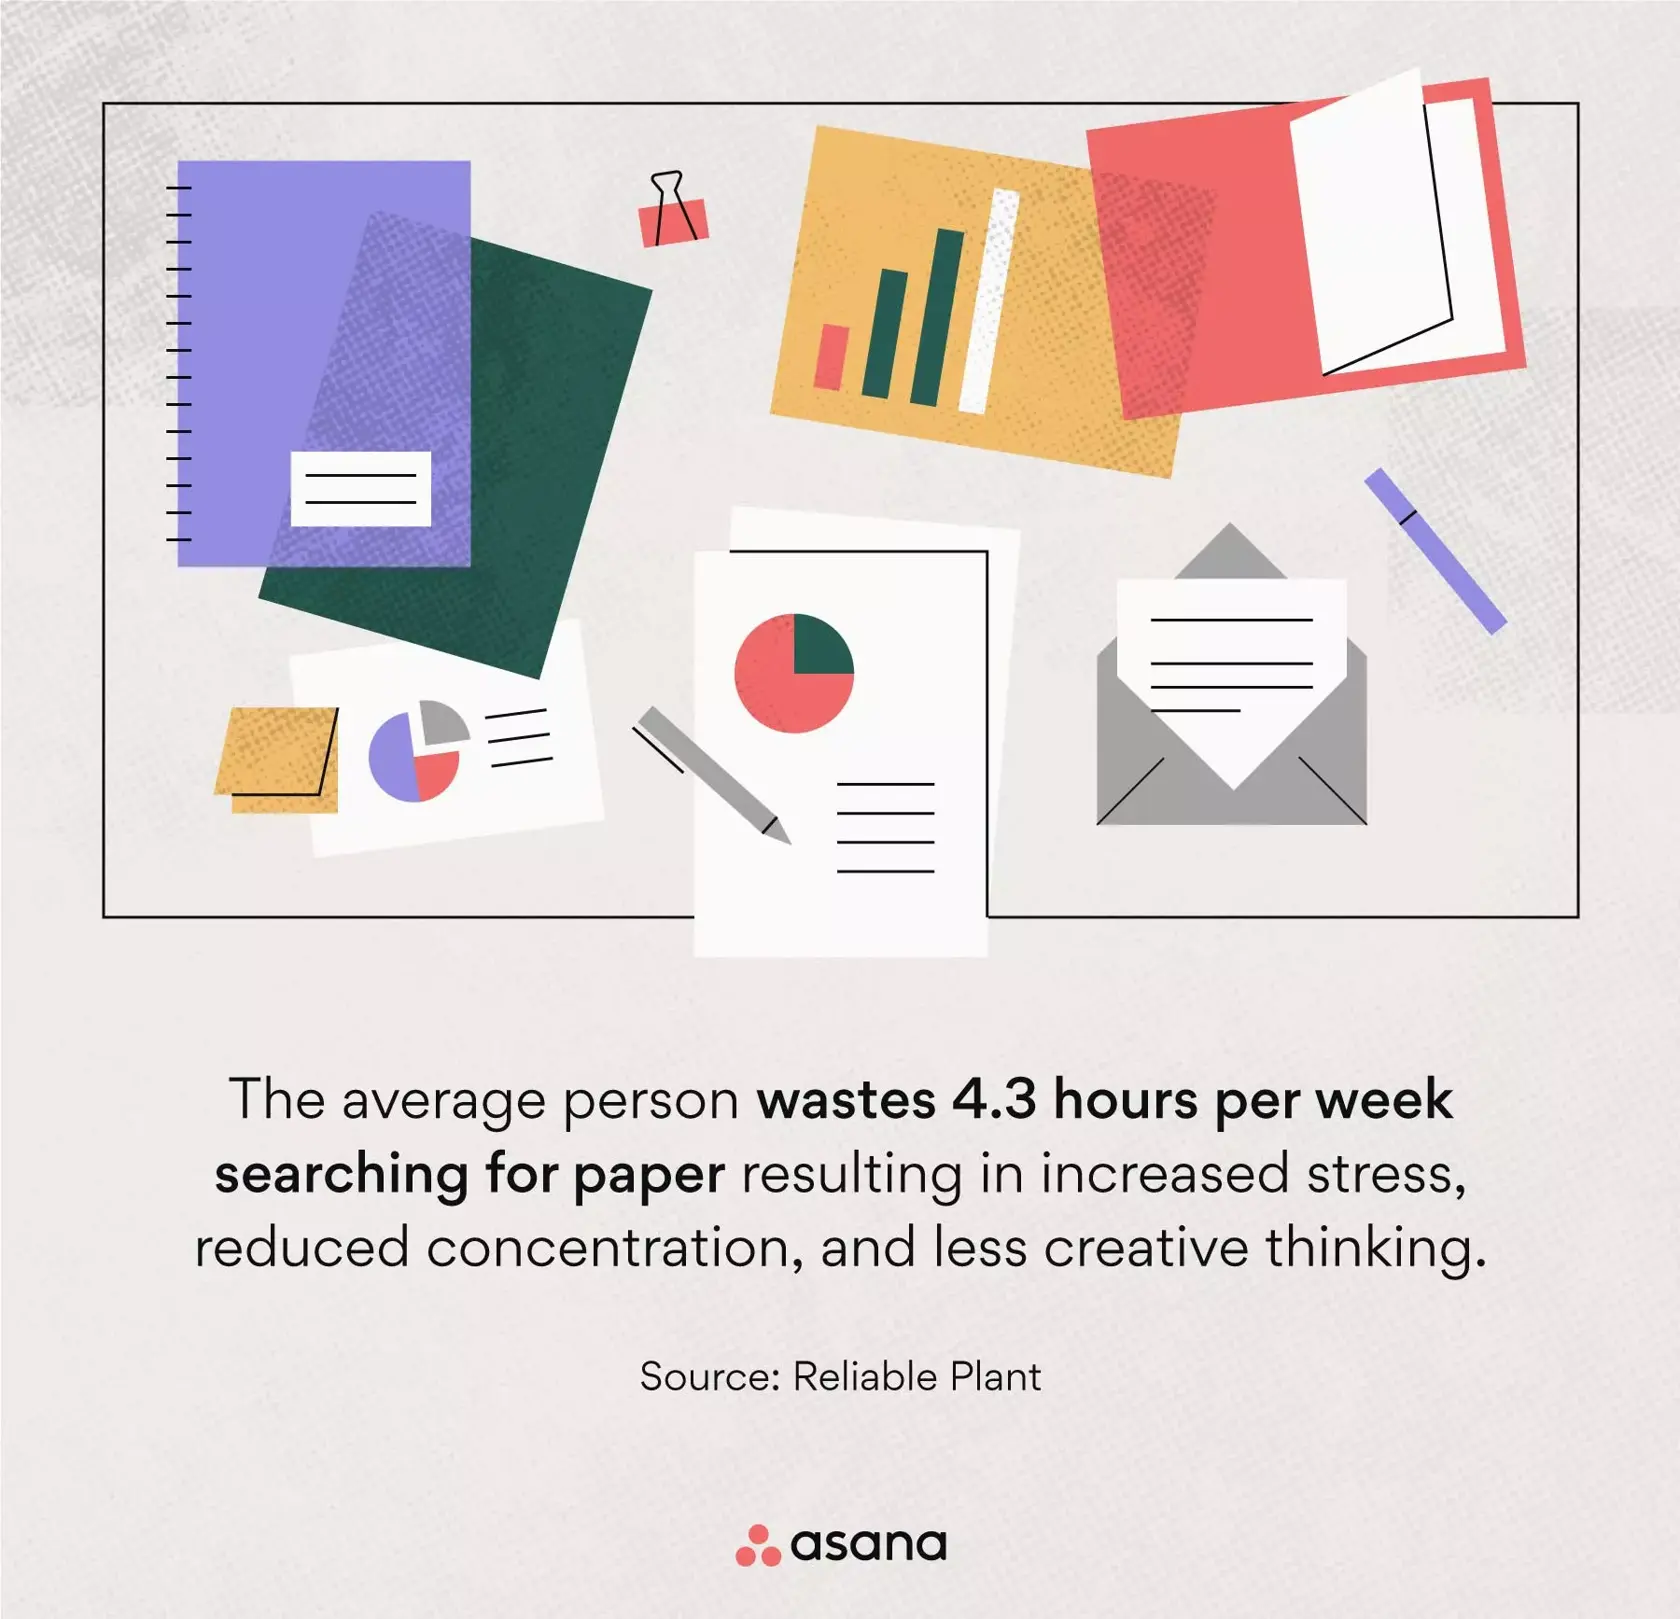 [inline illustration] the average person wastes 4.3 hours per week searching for papers (infographic)